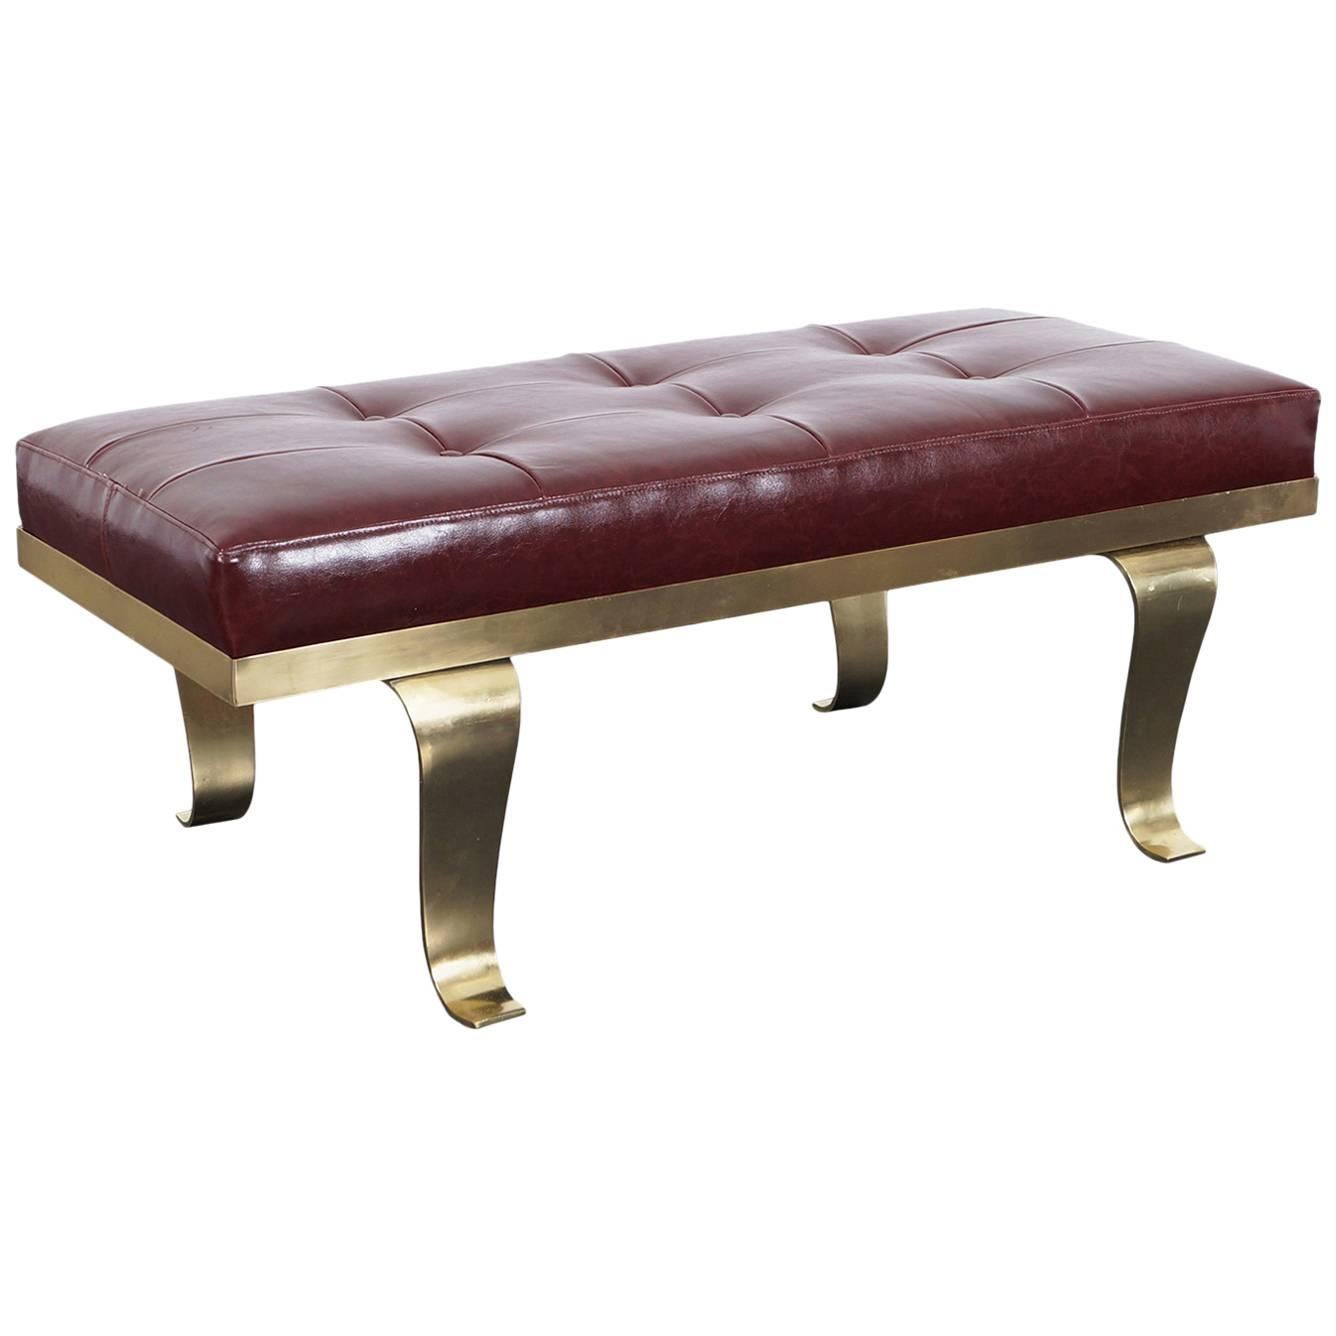 Modernist Brass and Leather Bench Attributed to Arturo Pani